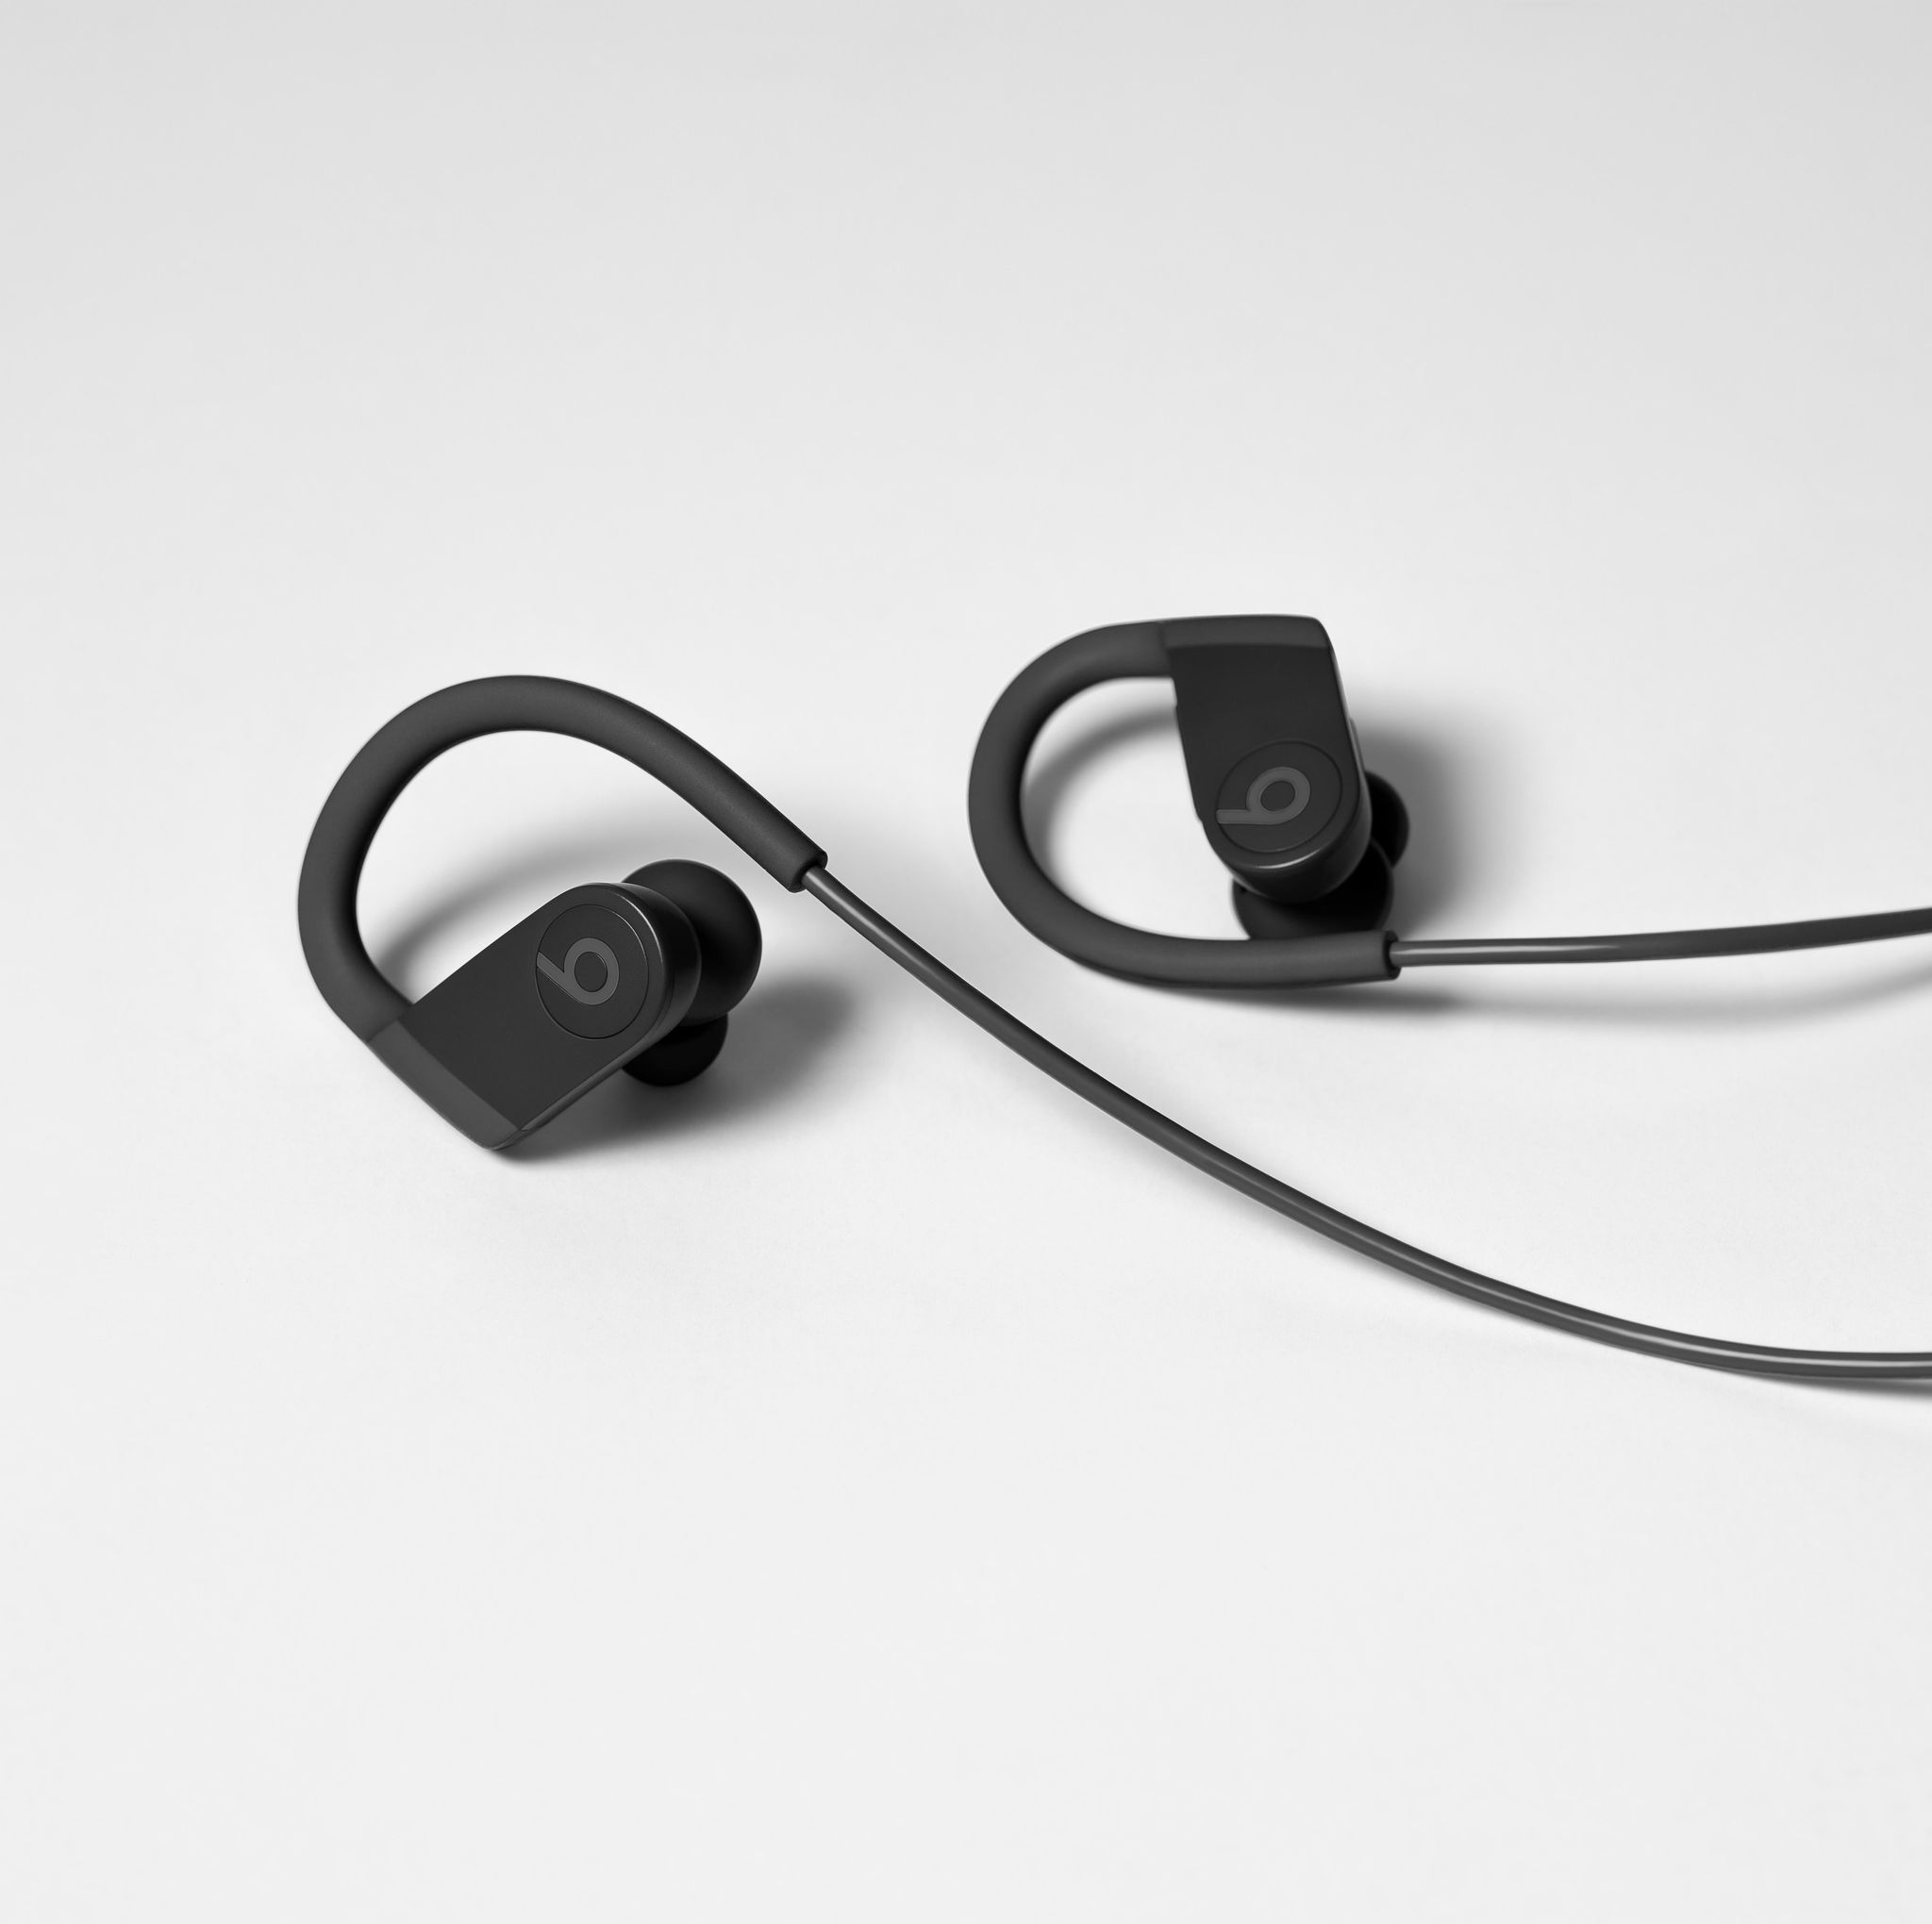 Kredsløb Fjendtlig anspore We've run 50 miles in the new Powerbeats - here's what we thought